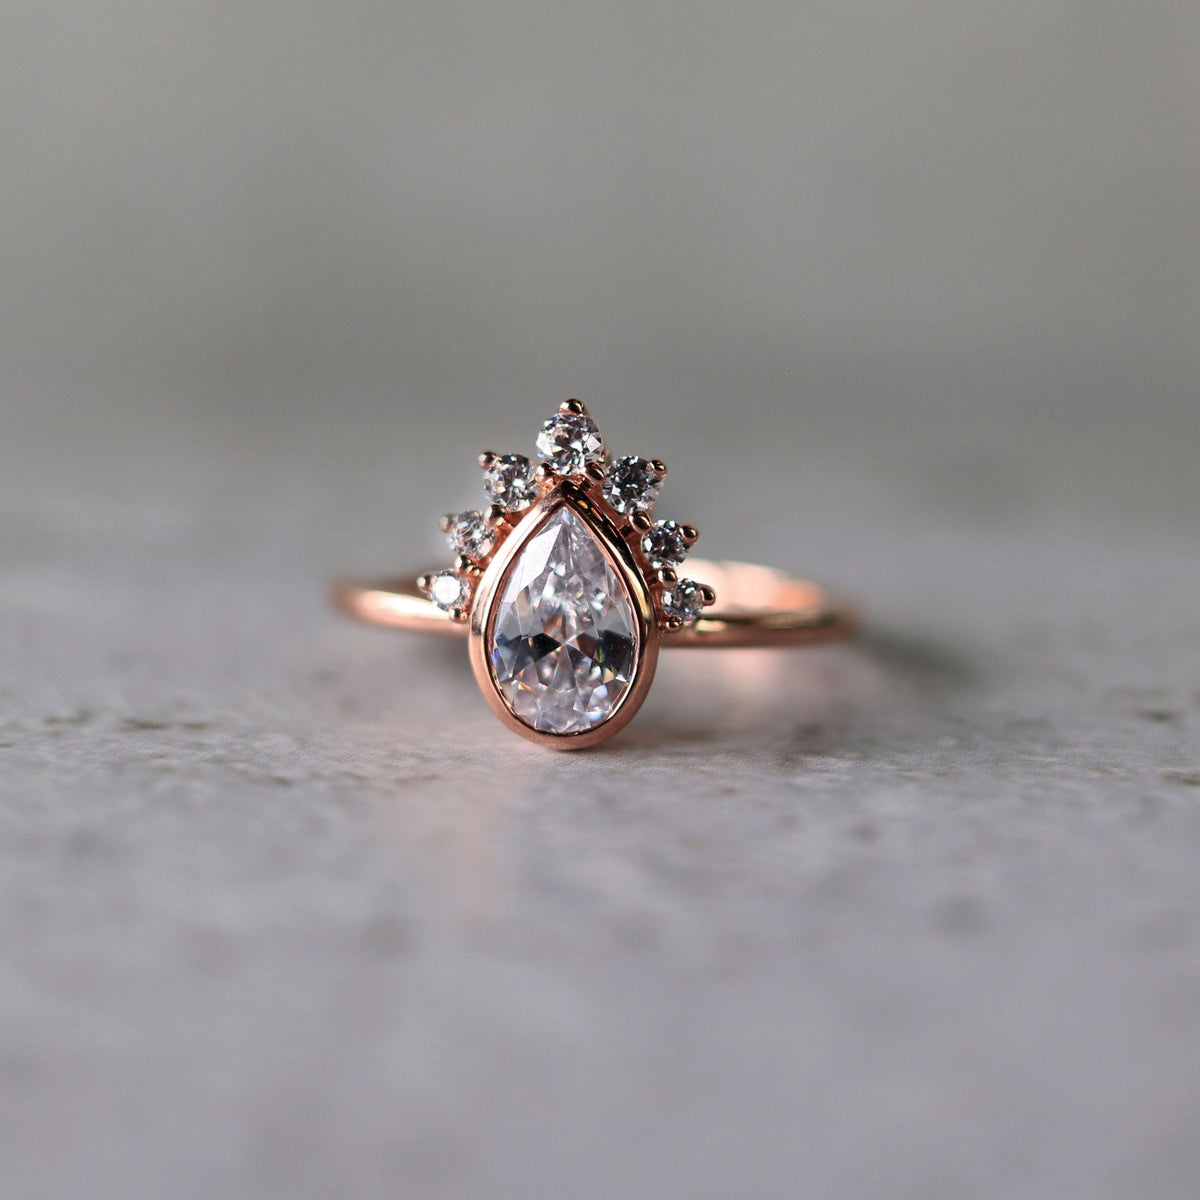 Pear-Shaped Diamond Crown 14K Rose Gold Engagement Ring